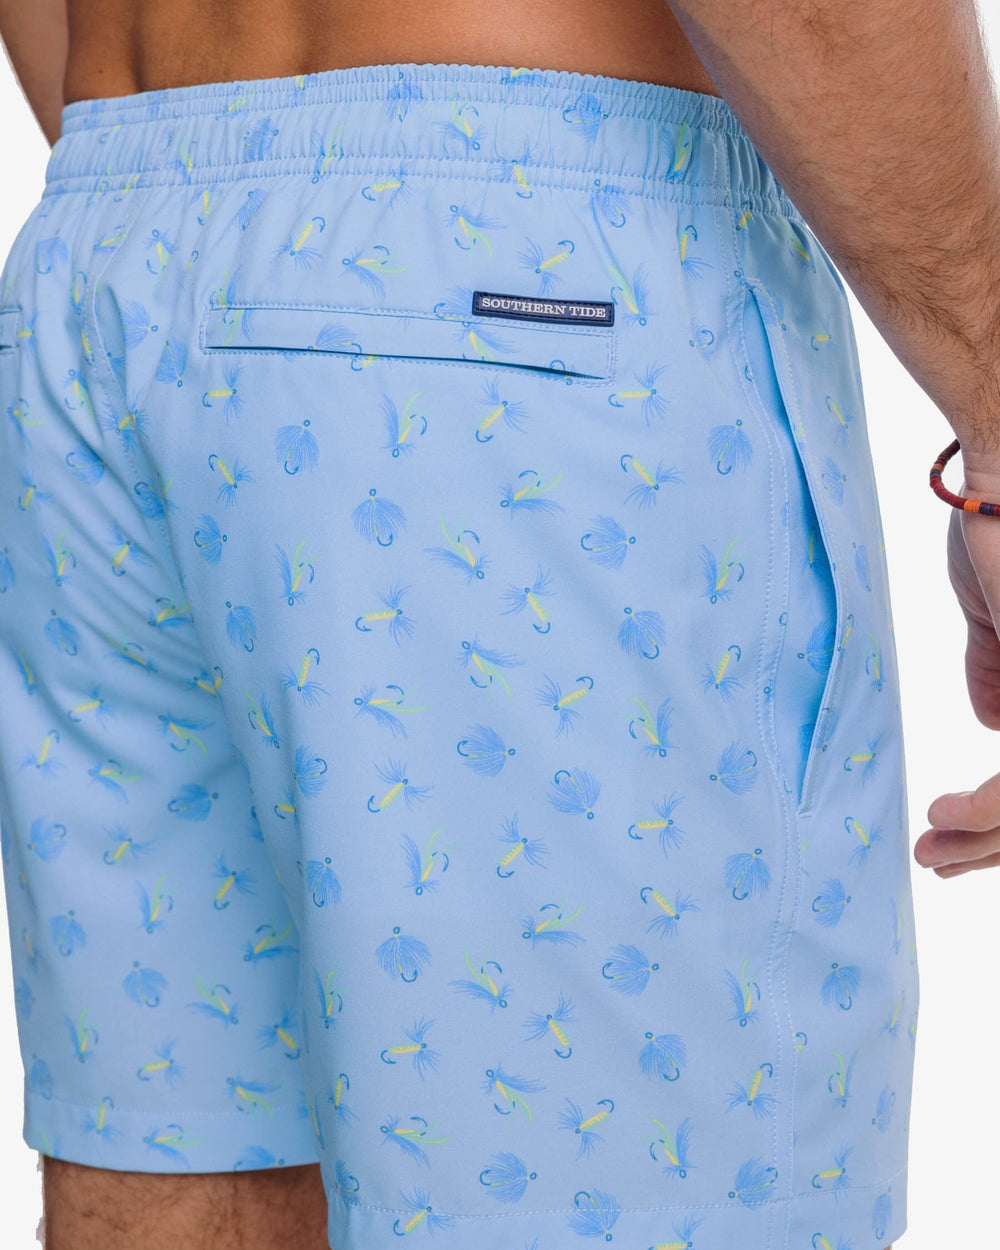 The detail view of the Southern Tide Guy With Allure Printed Swim Trunk by Southern Tide - Rain Water